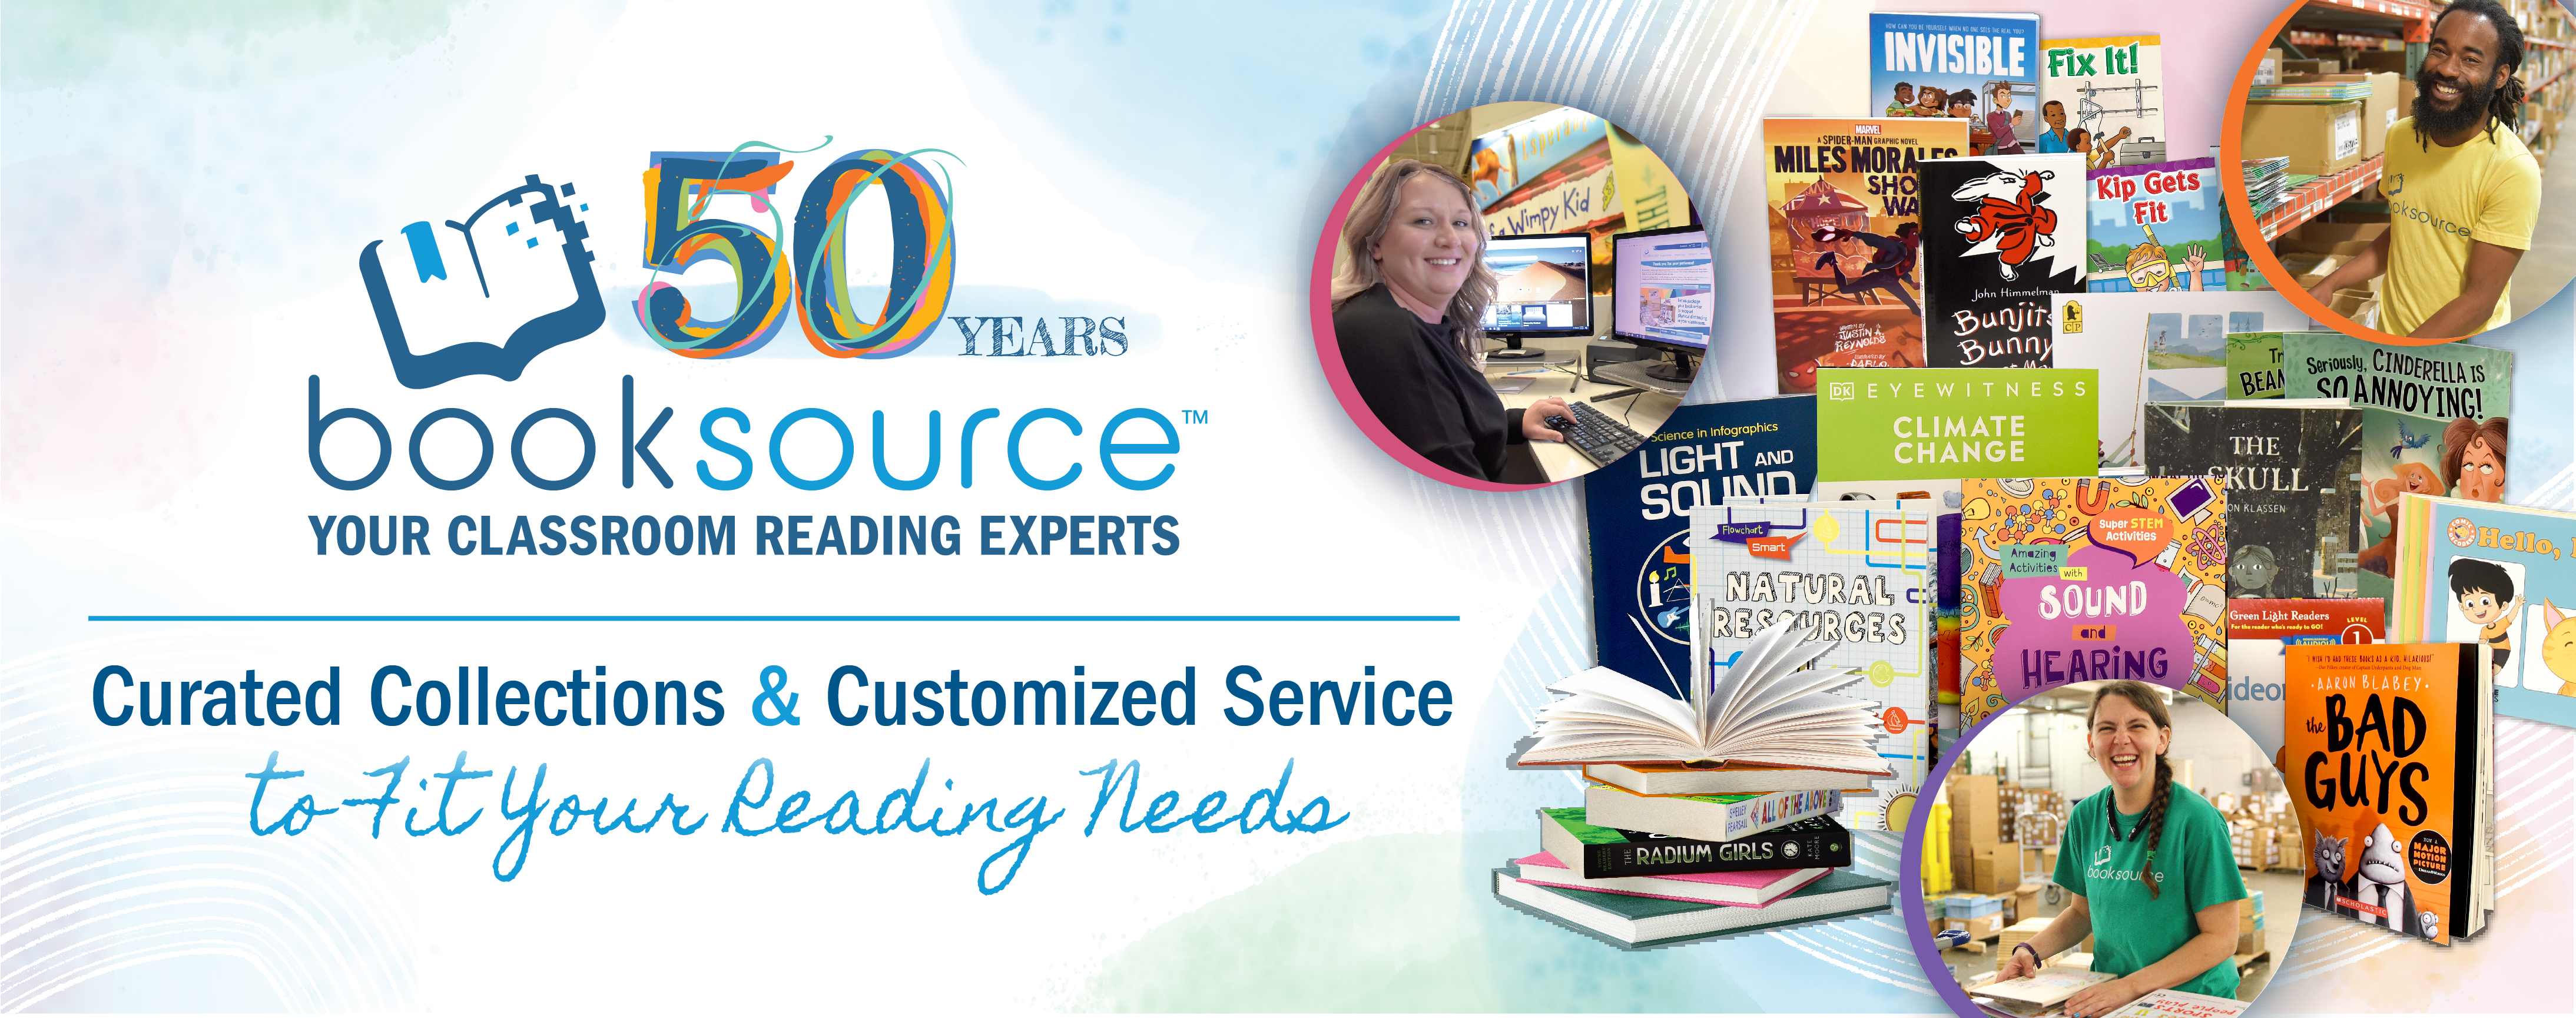 Your Classroom Reading Experts